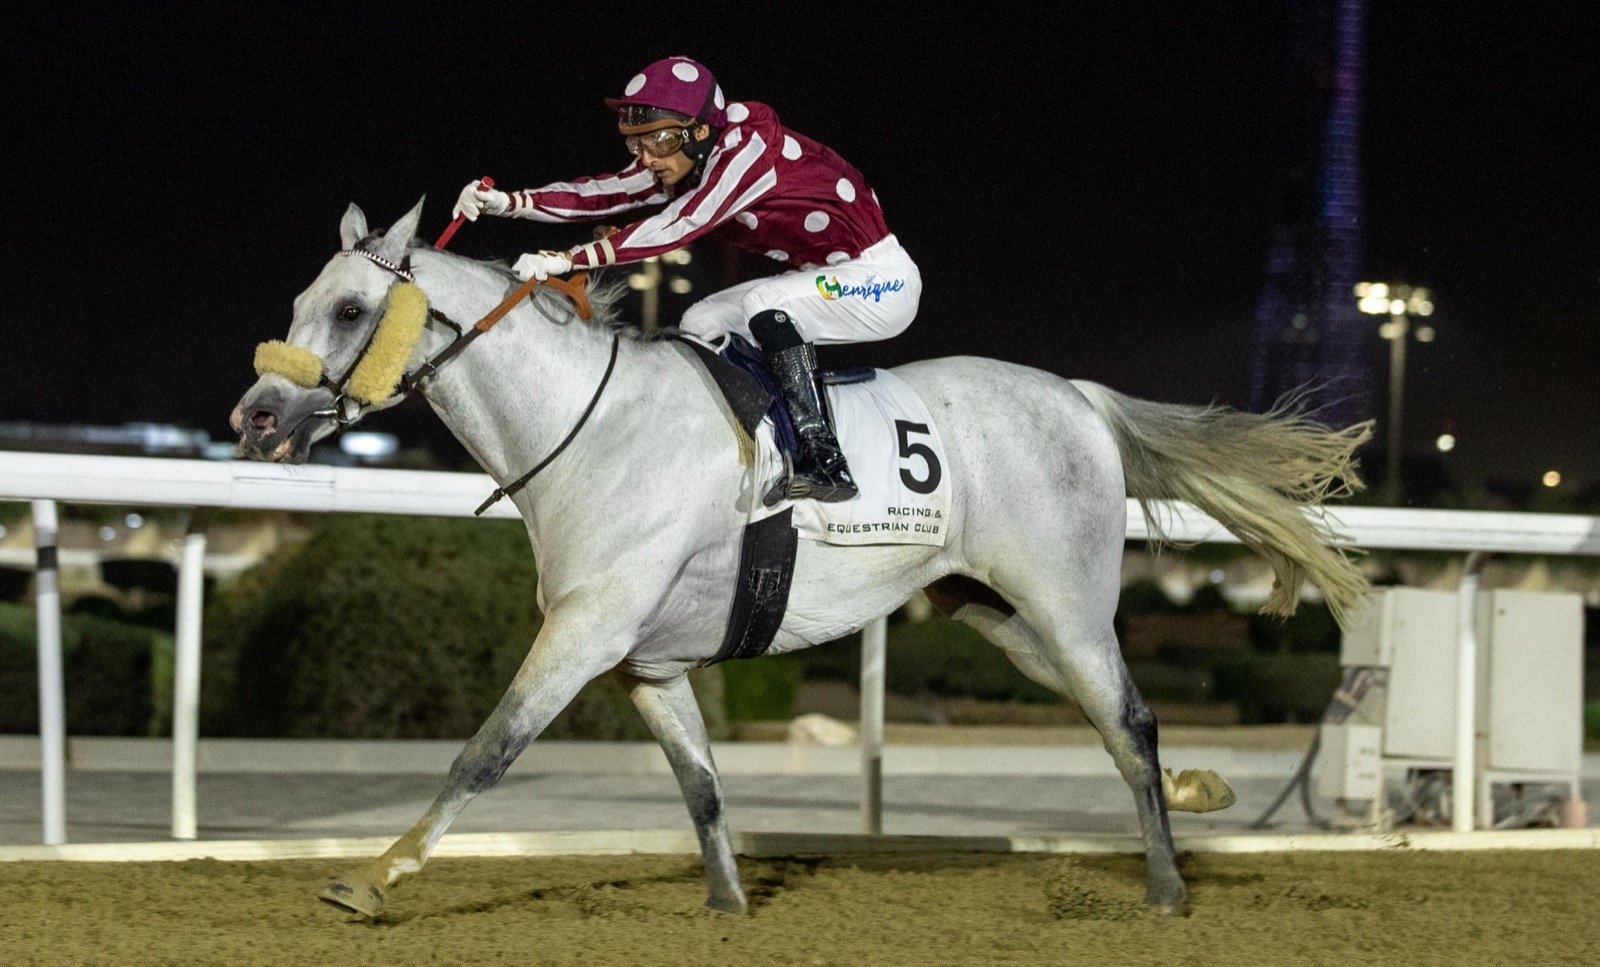 "Sealine" Wins the Doha Cup for Purebred Arabian Horses